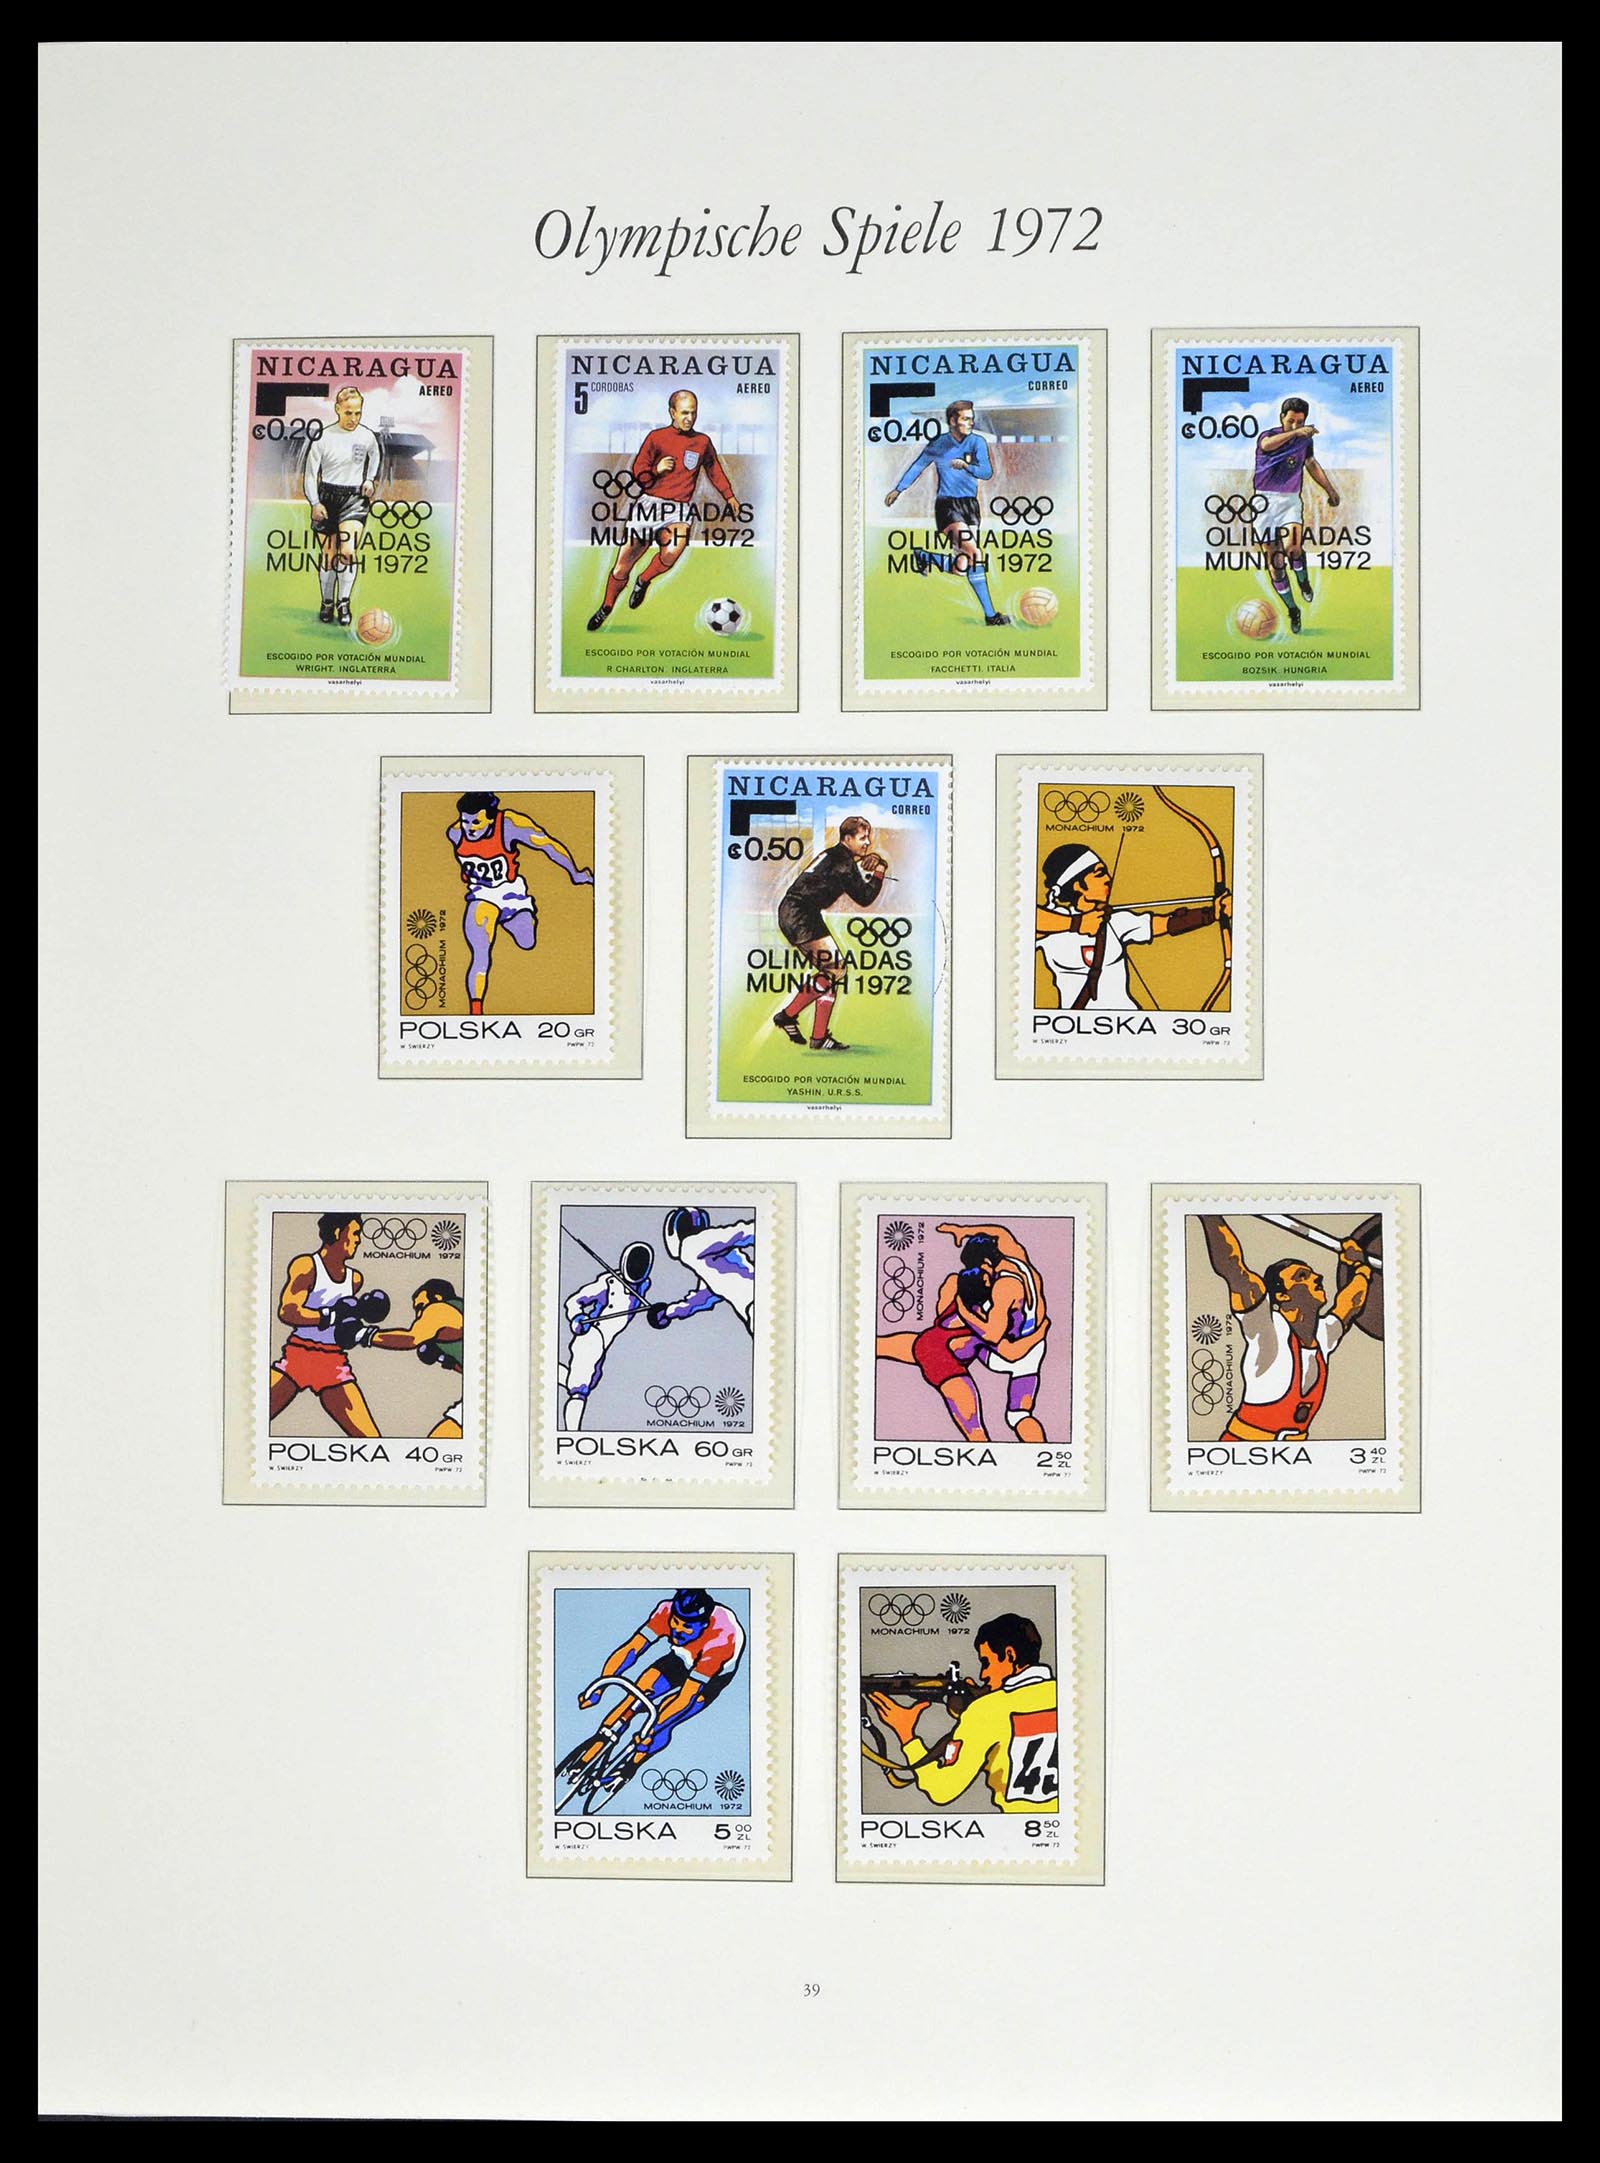 39237 0096 - Stamp collection 39237 Olympics 1972.